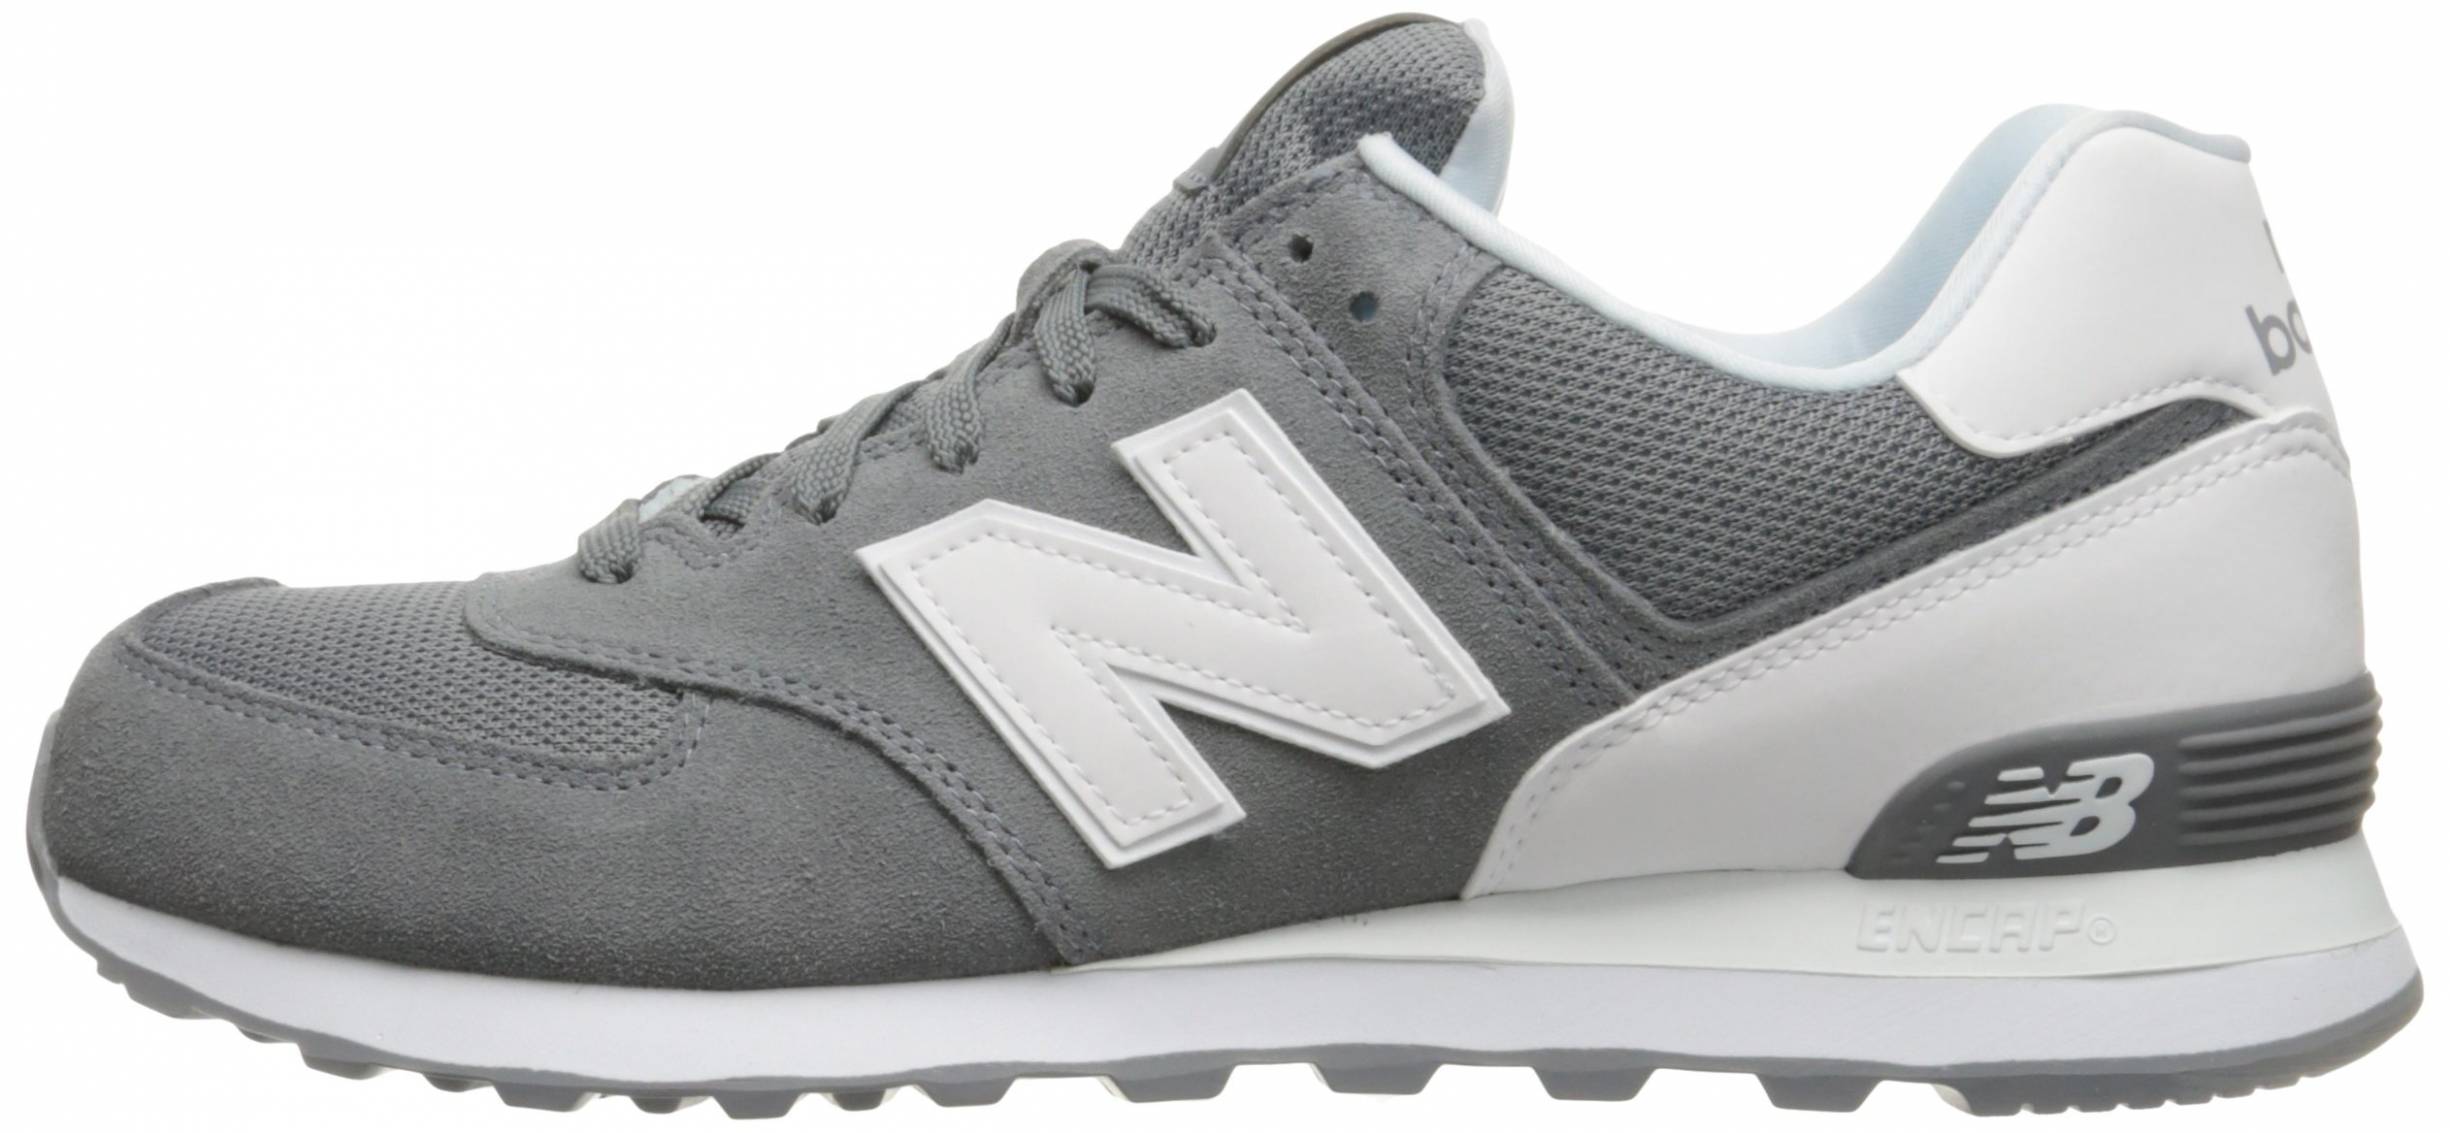 13 Reasons to/NOT to Buy New Balance 574 Reflective (Sep 2021 ...